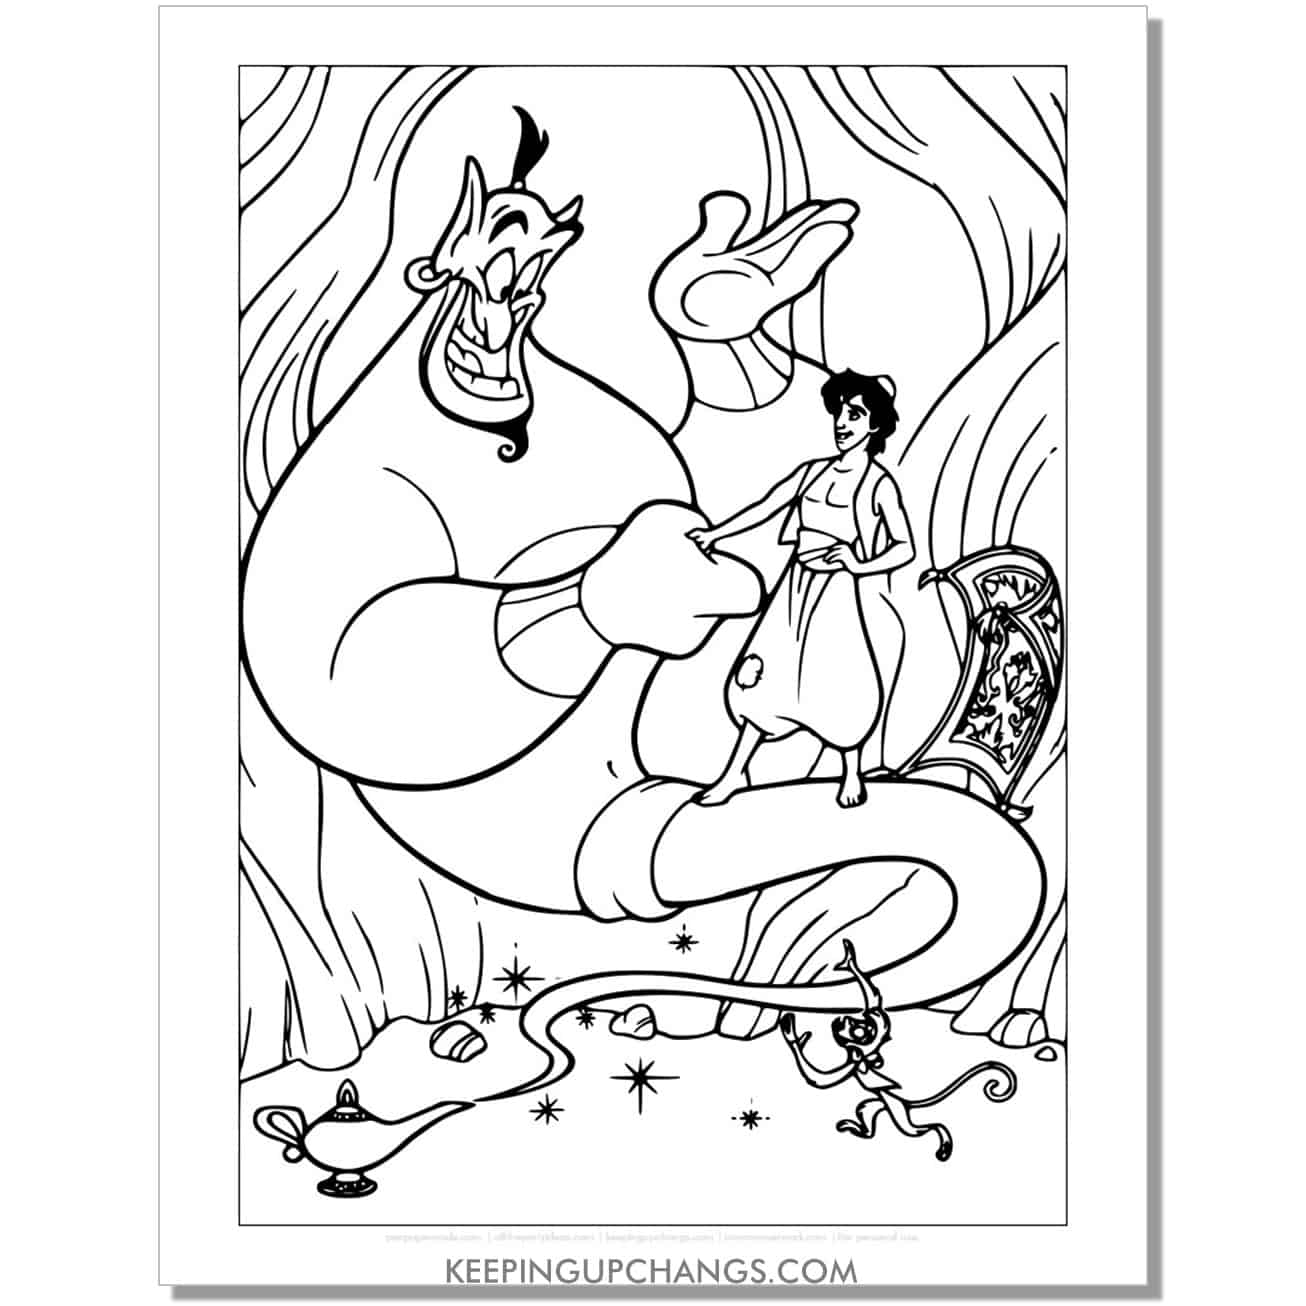 aladdin genie shaking hands coloring page, sheet.